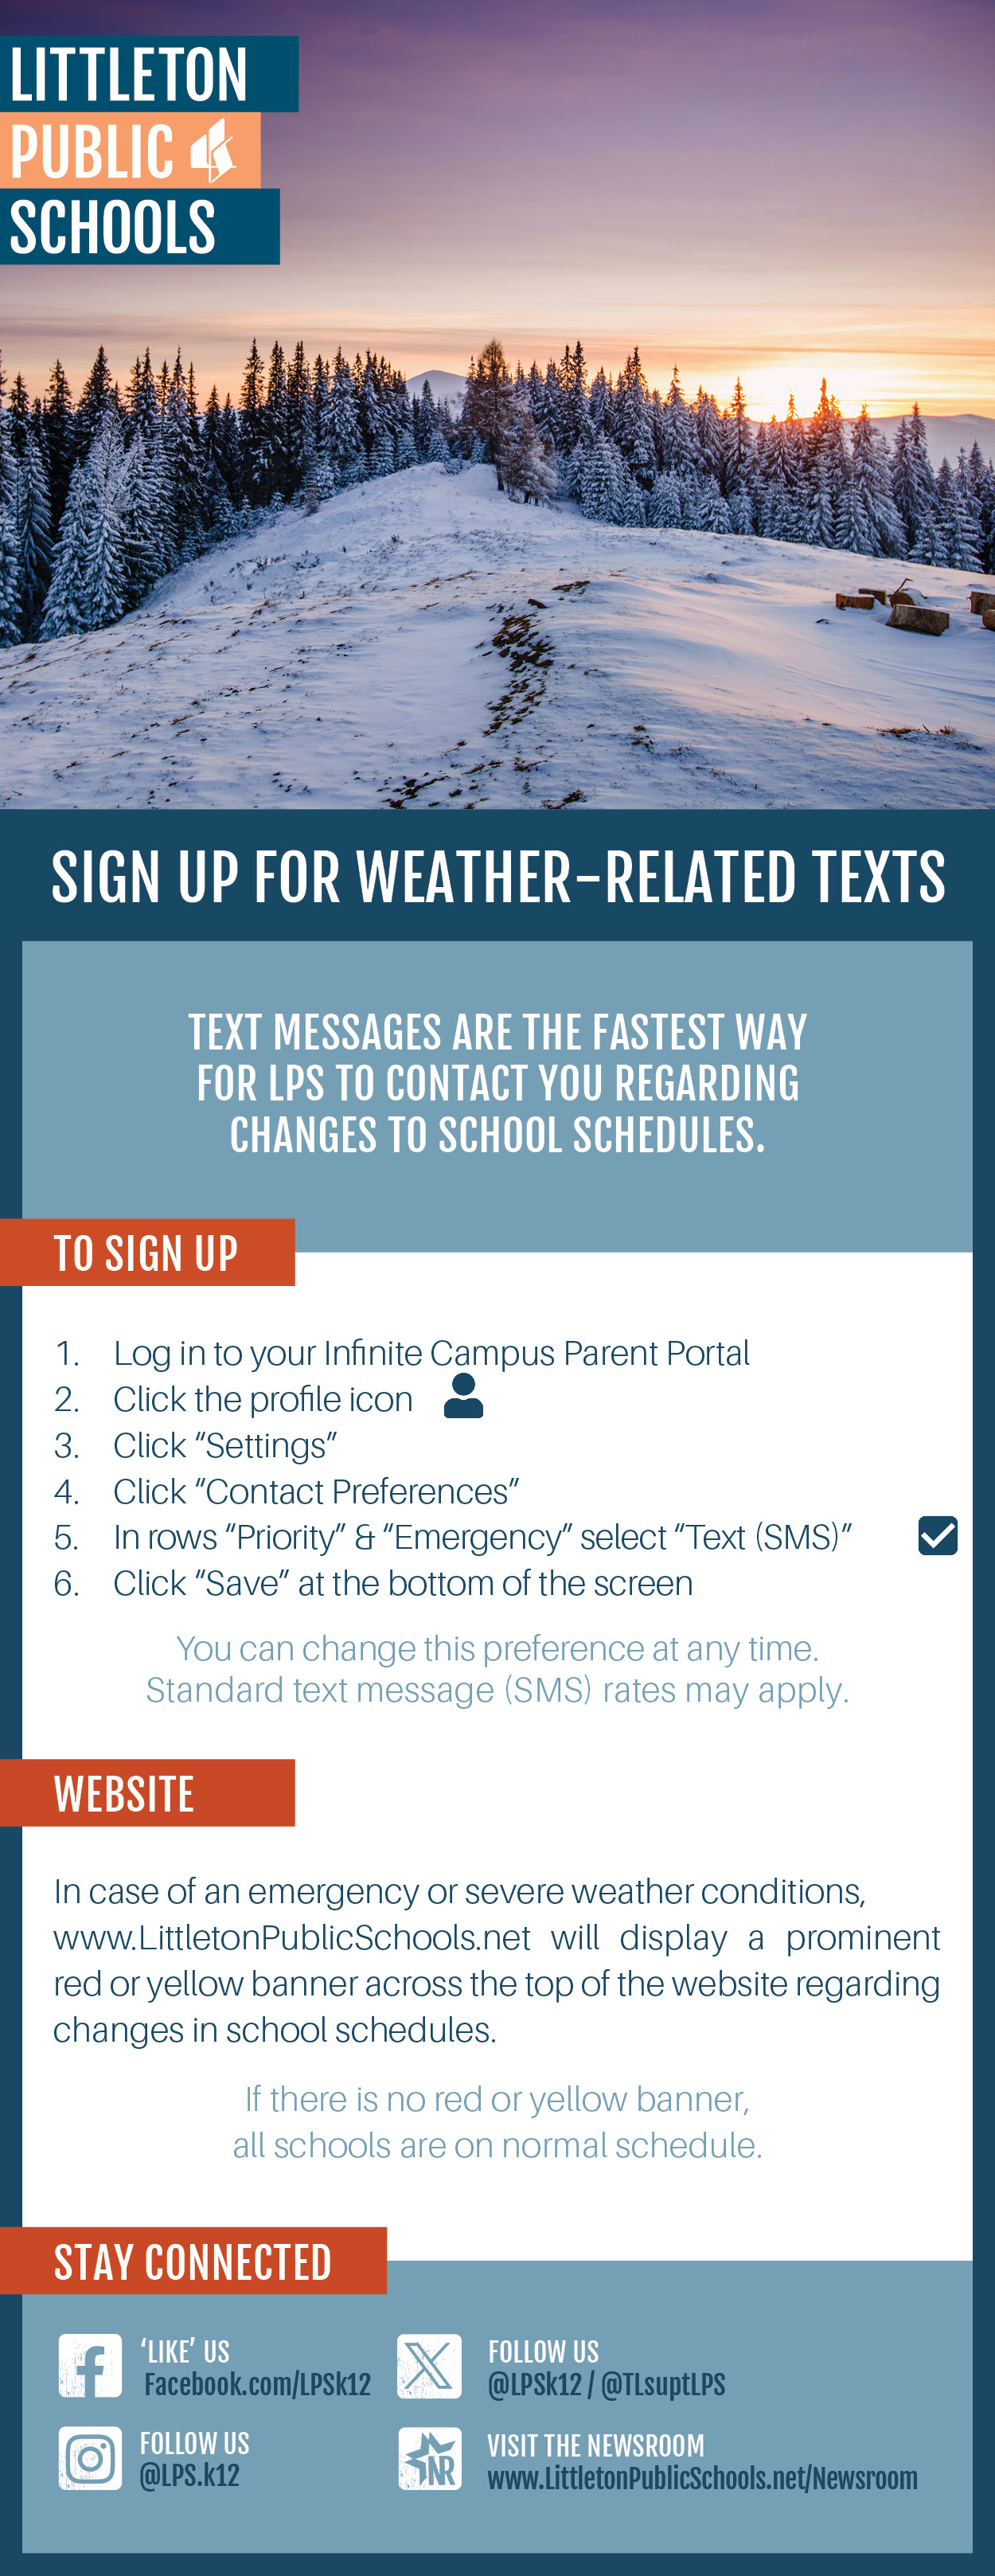 Sign up for weather related texts. Links to a pdf with full details the show same information that is accessible.